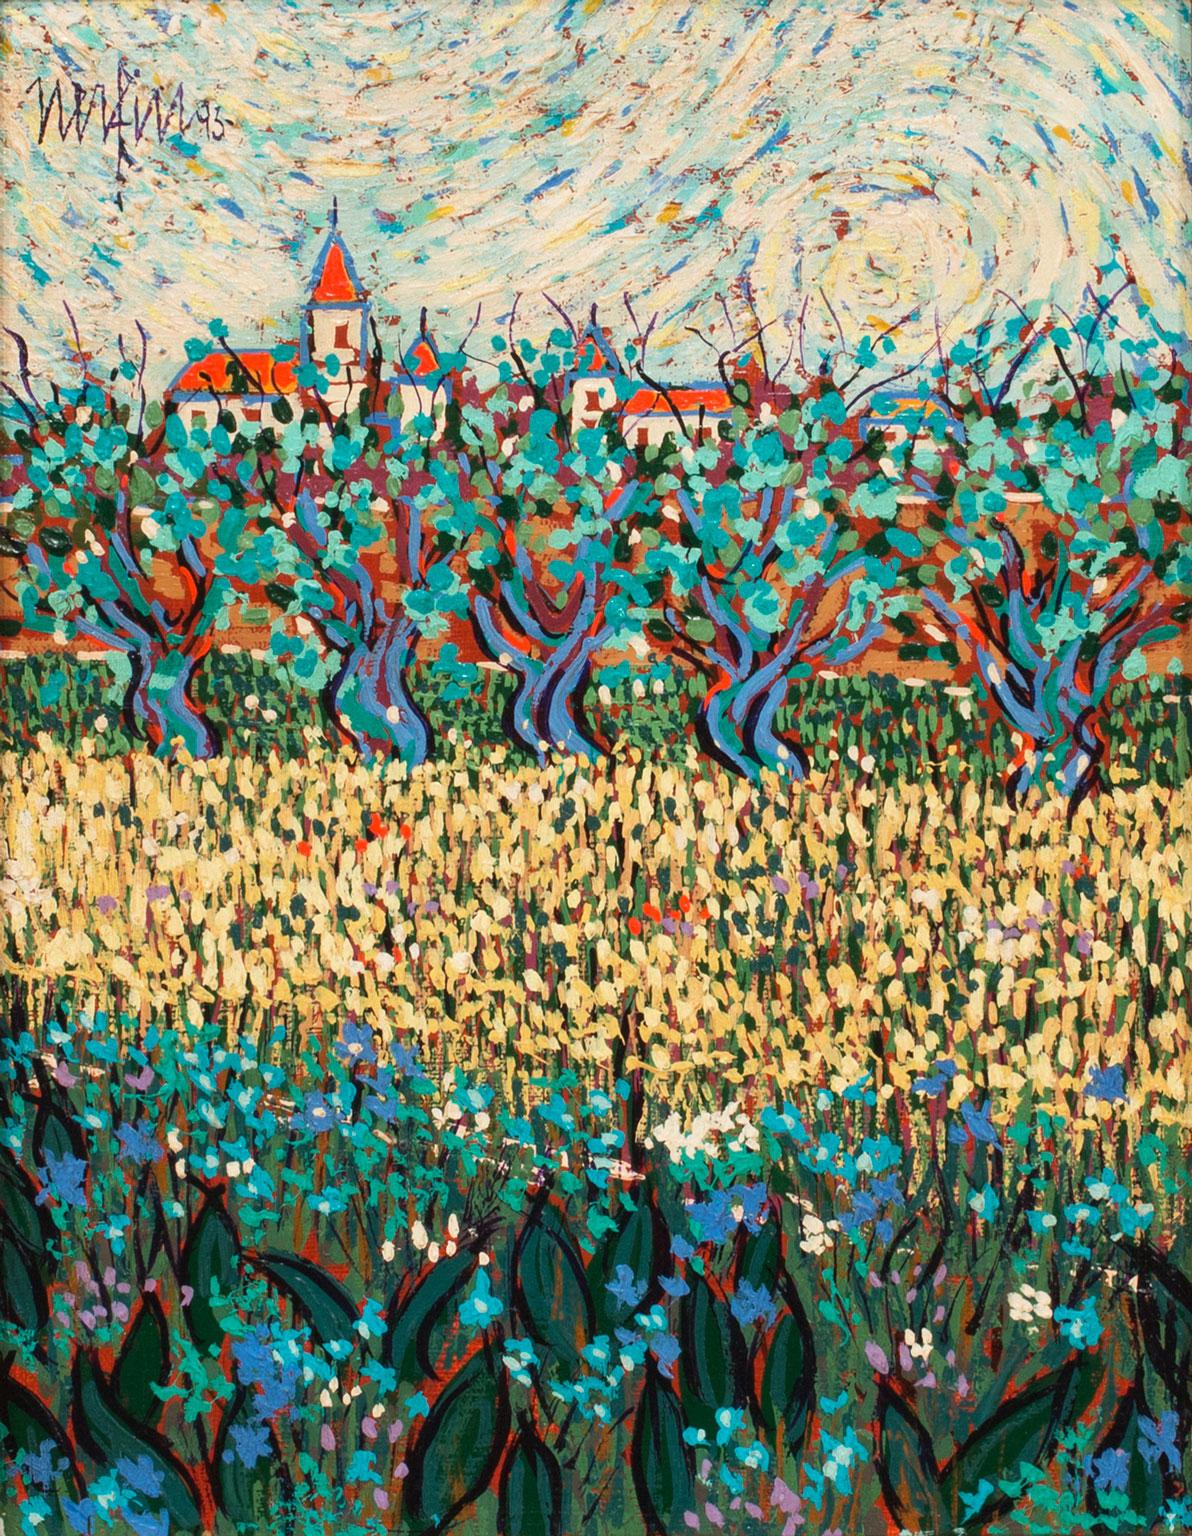 Untitled Abstract Landscape, an original oil on canvas by Jean Nerfin, is a piece for the true collector. Nerfin's use of color and a combined Post-Impressionist-Fauvism-Pointillism style speaks to a unique style of his own. His works have